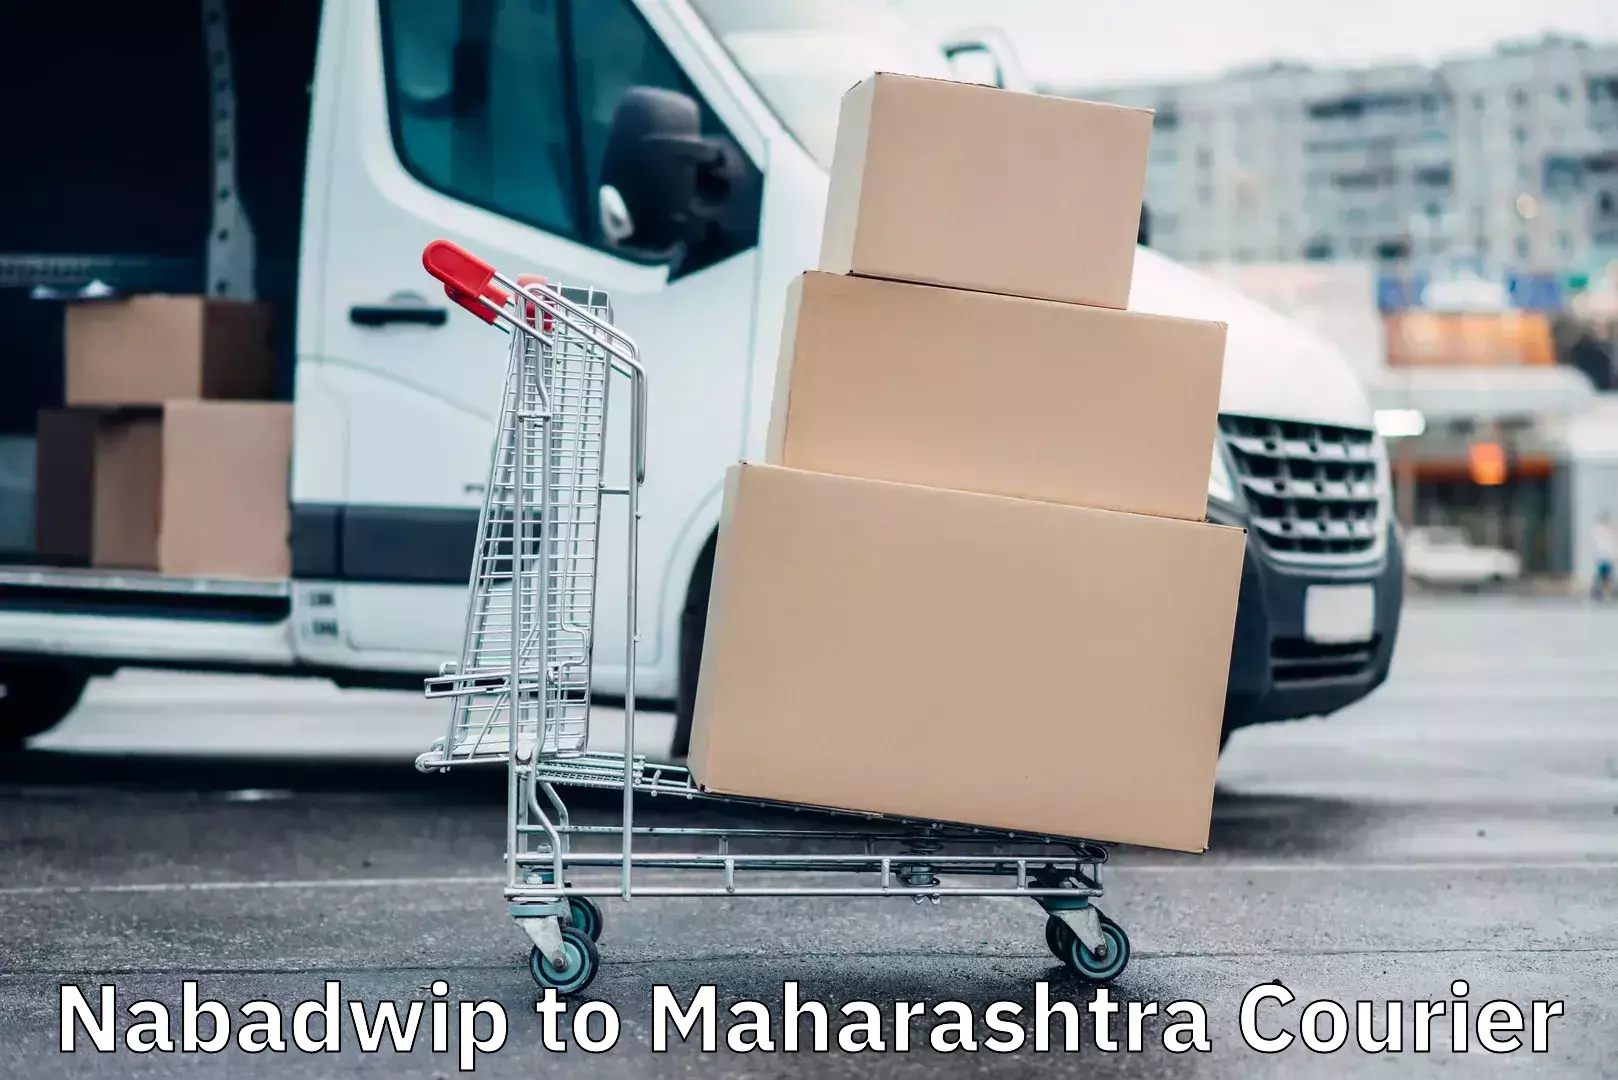 Express courier capabilities Nabadwip to Nagpur